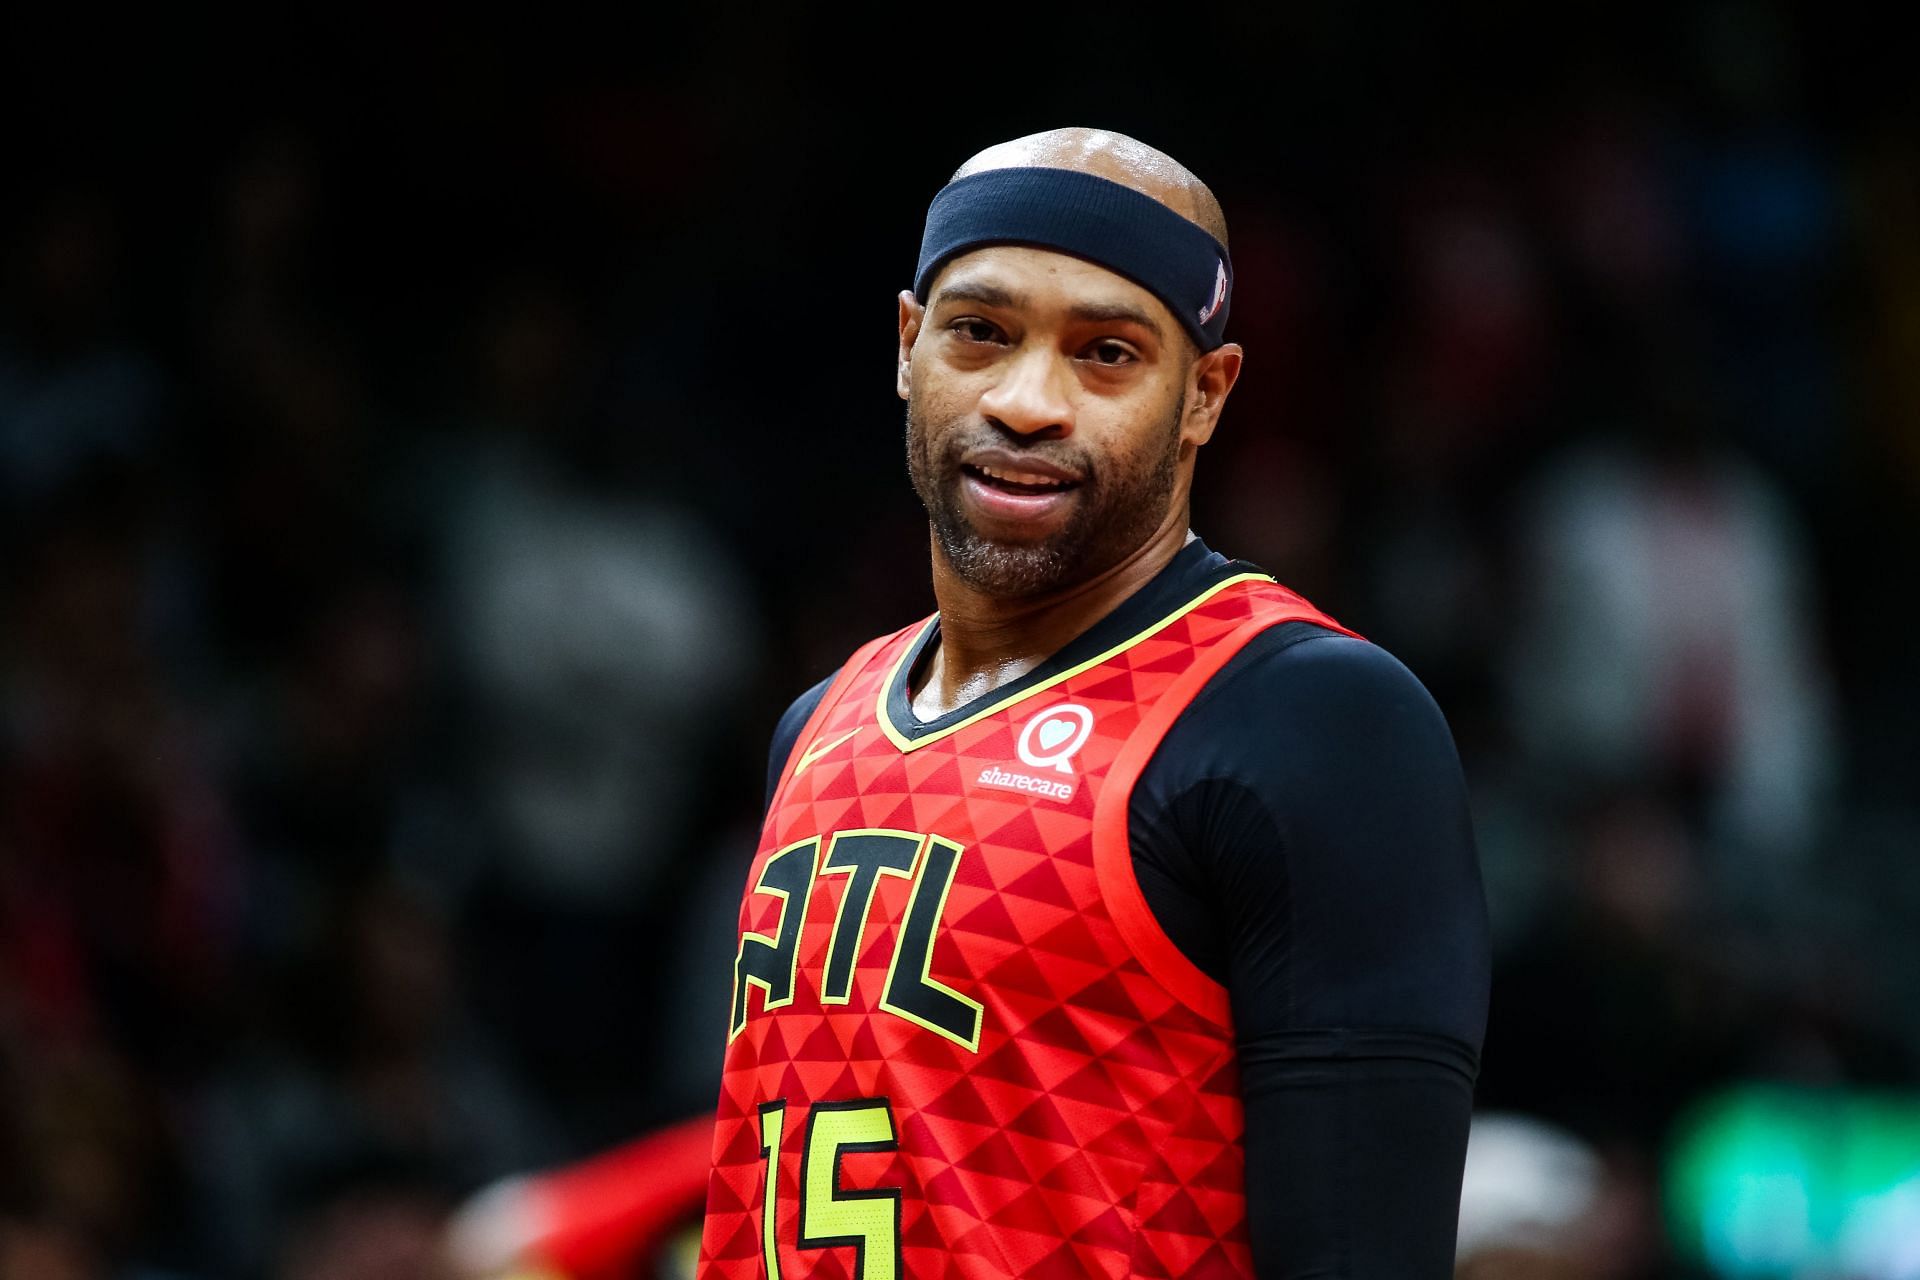 NBA legend Vince Carter was one of the most gifted players to play the game